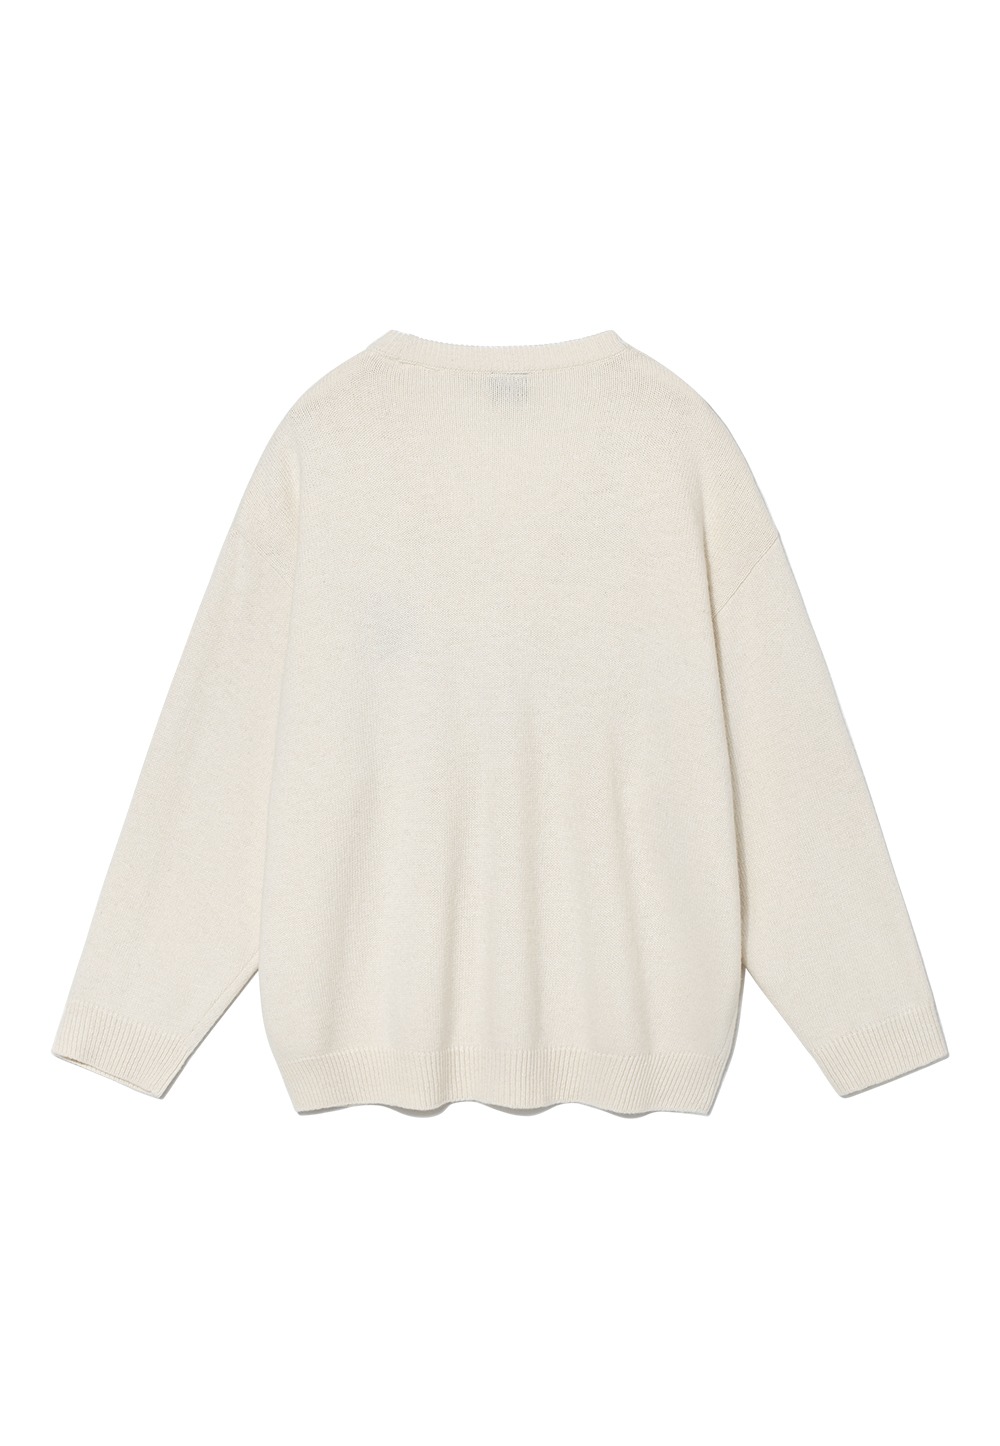 Signature daily over fit knit cardigan - IVORY